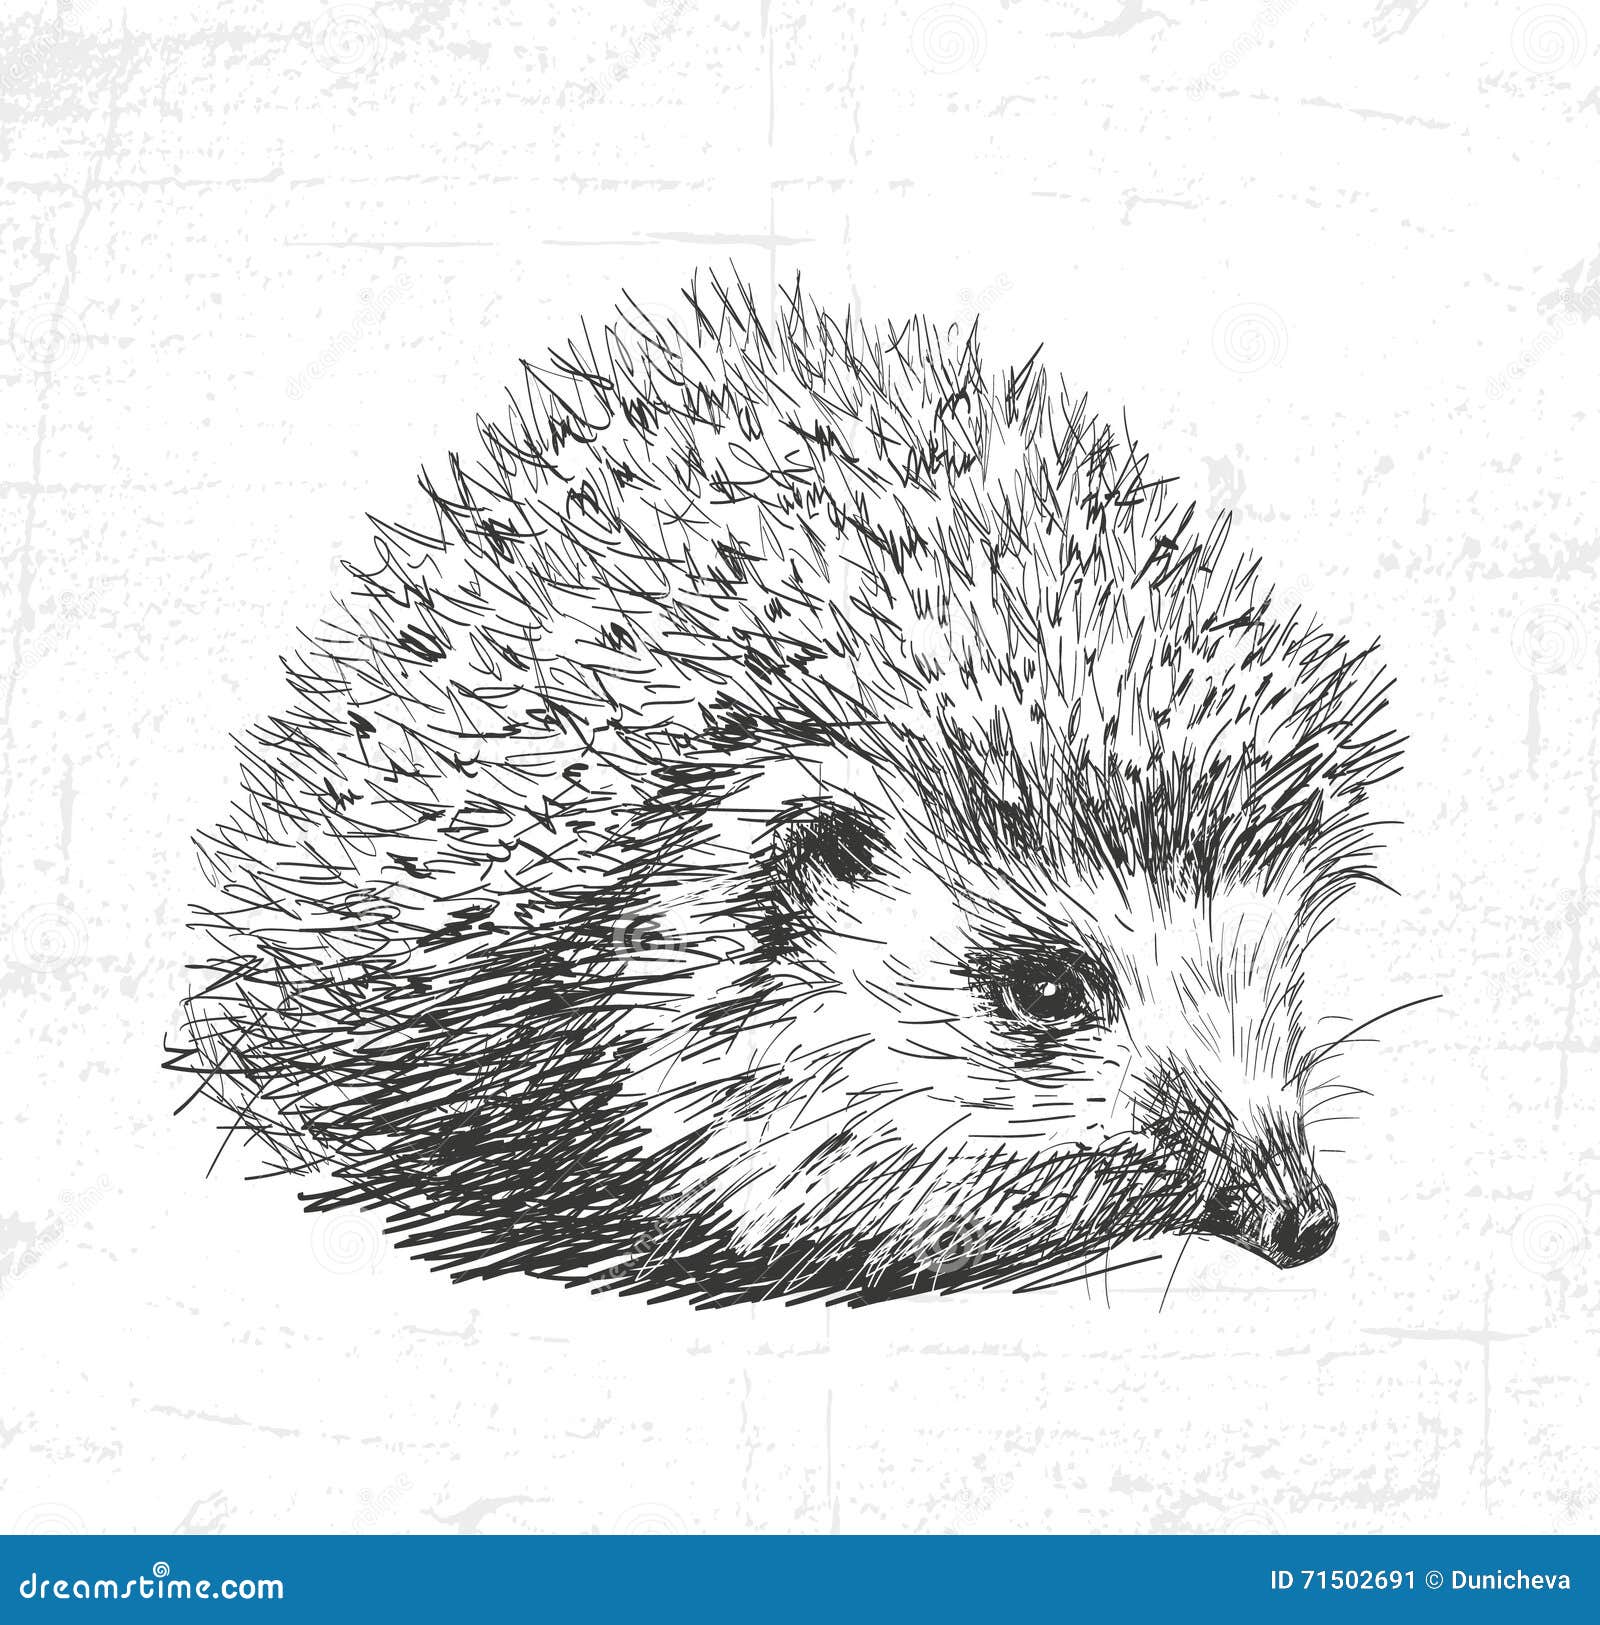 hedgehog. see also the other sets of animals.